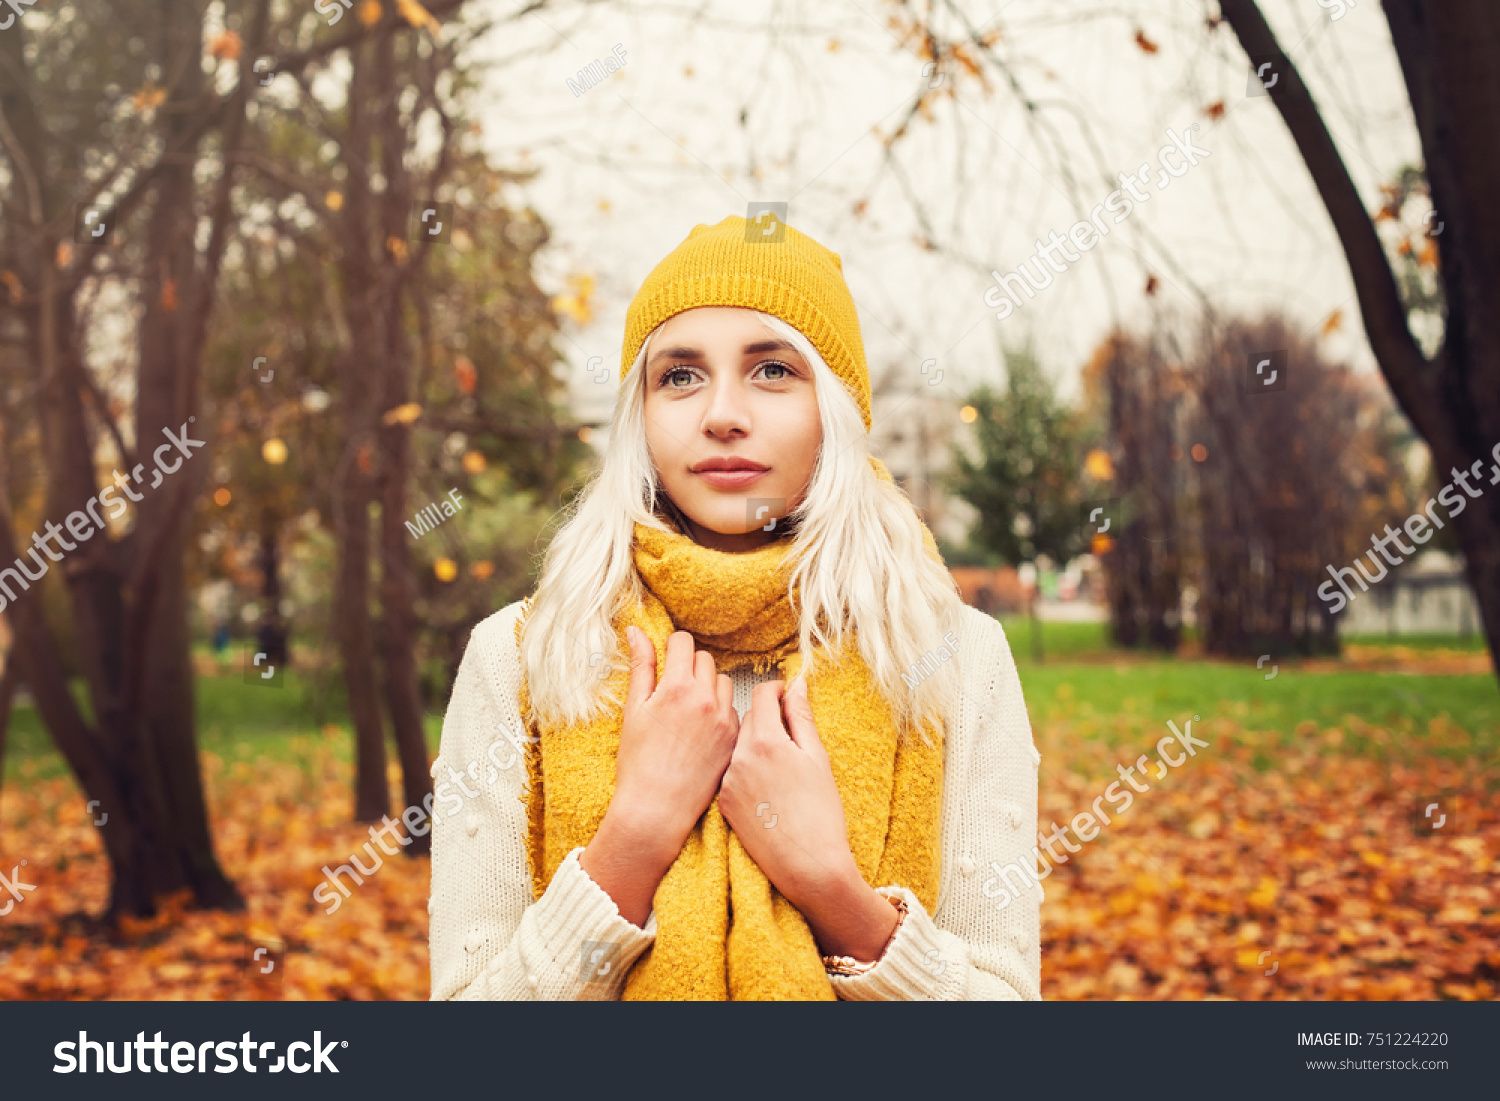 Pretty Autumn Woman with Yellow Cotton Scarf and Hat Outdoors #751224220